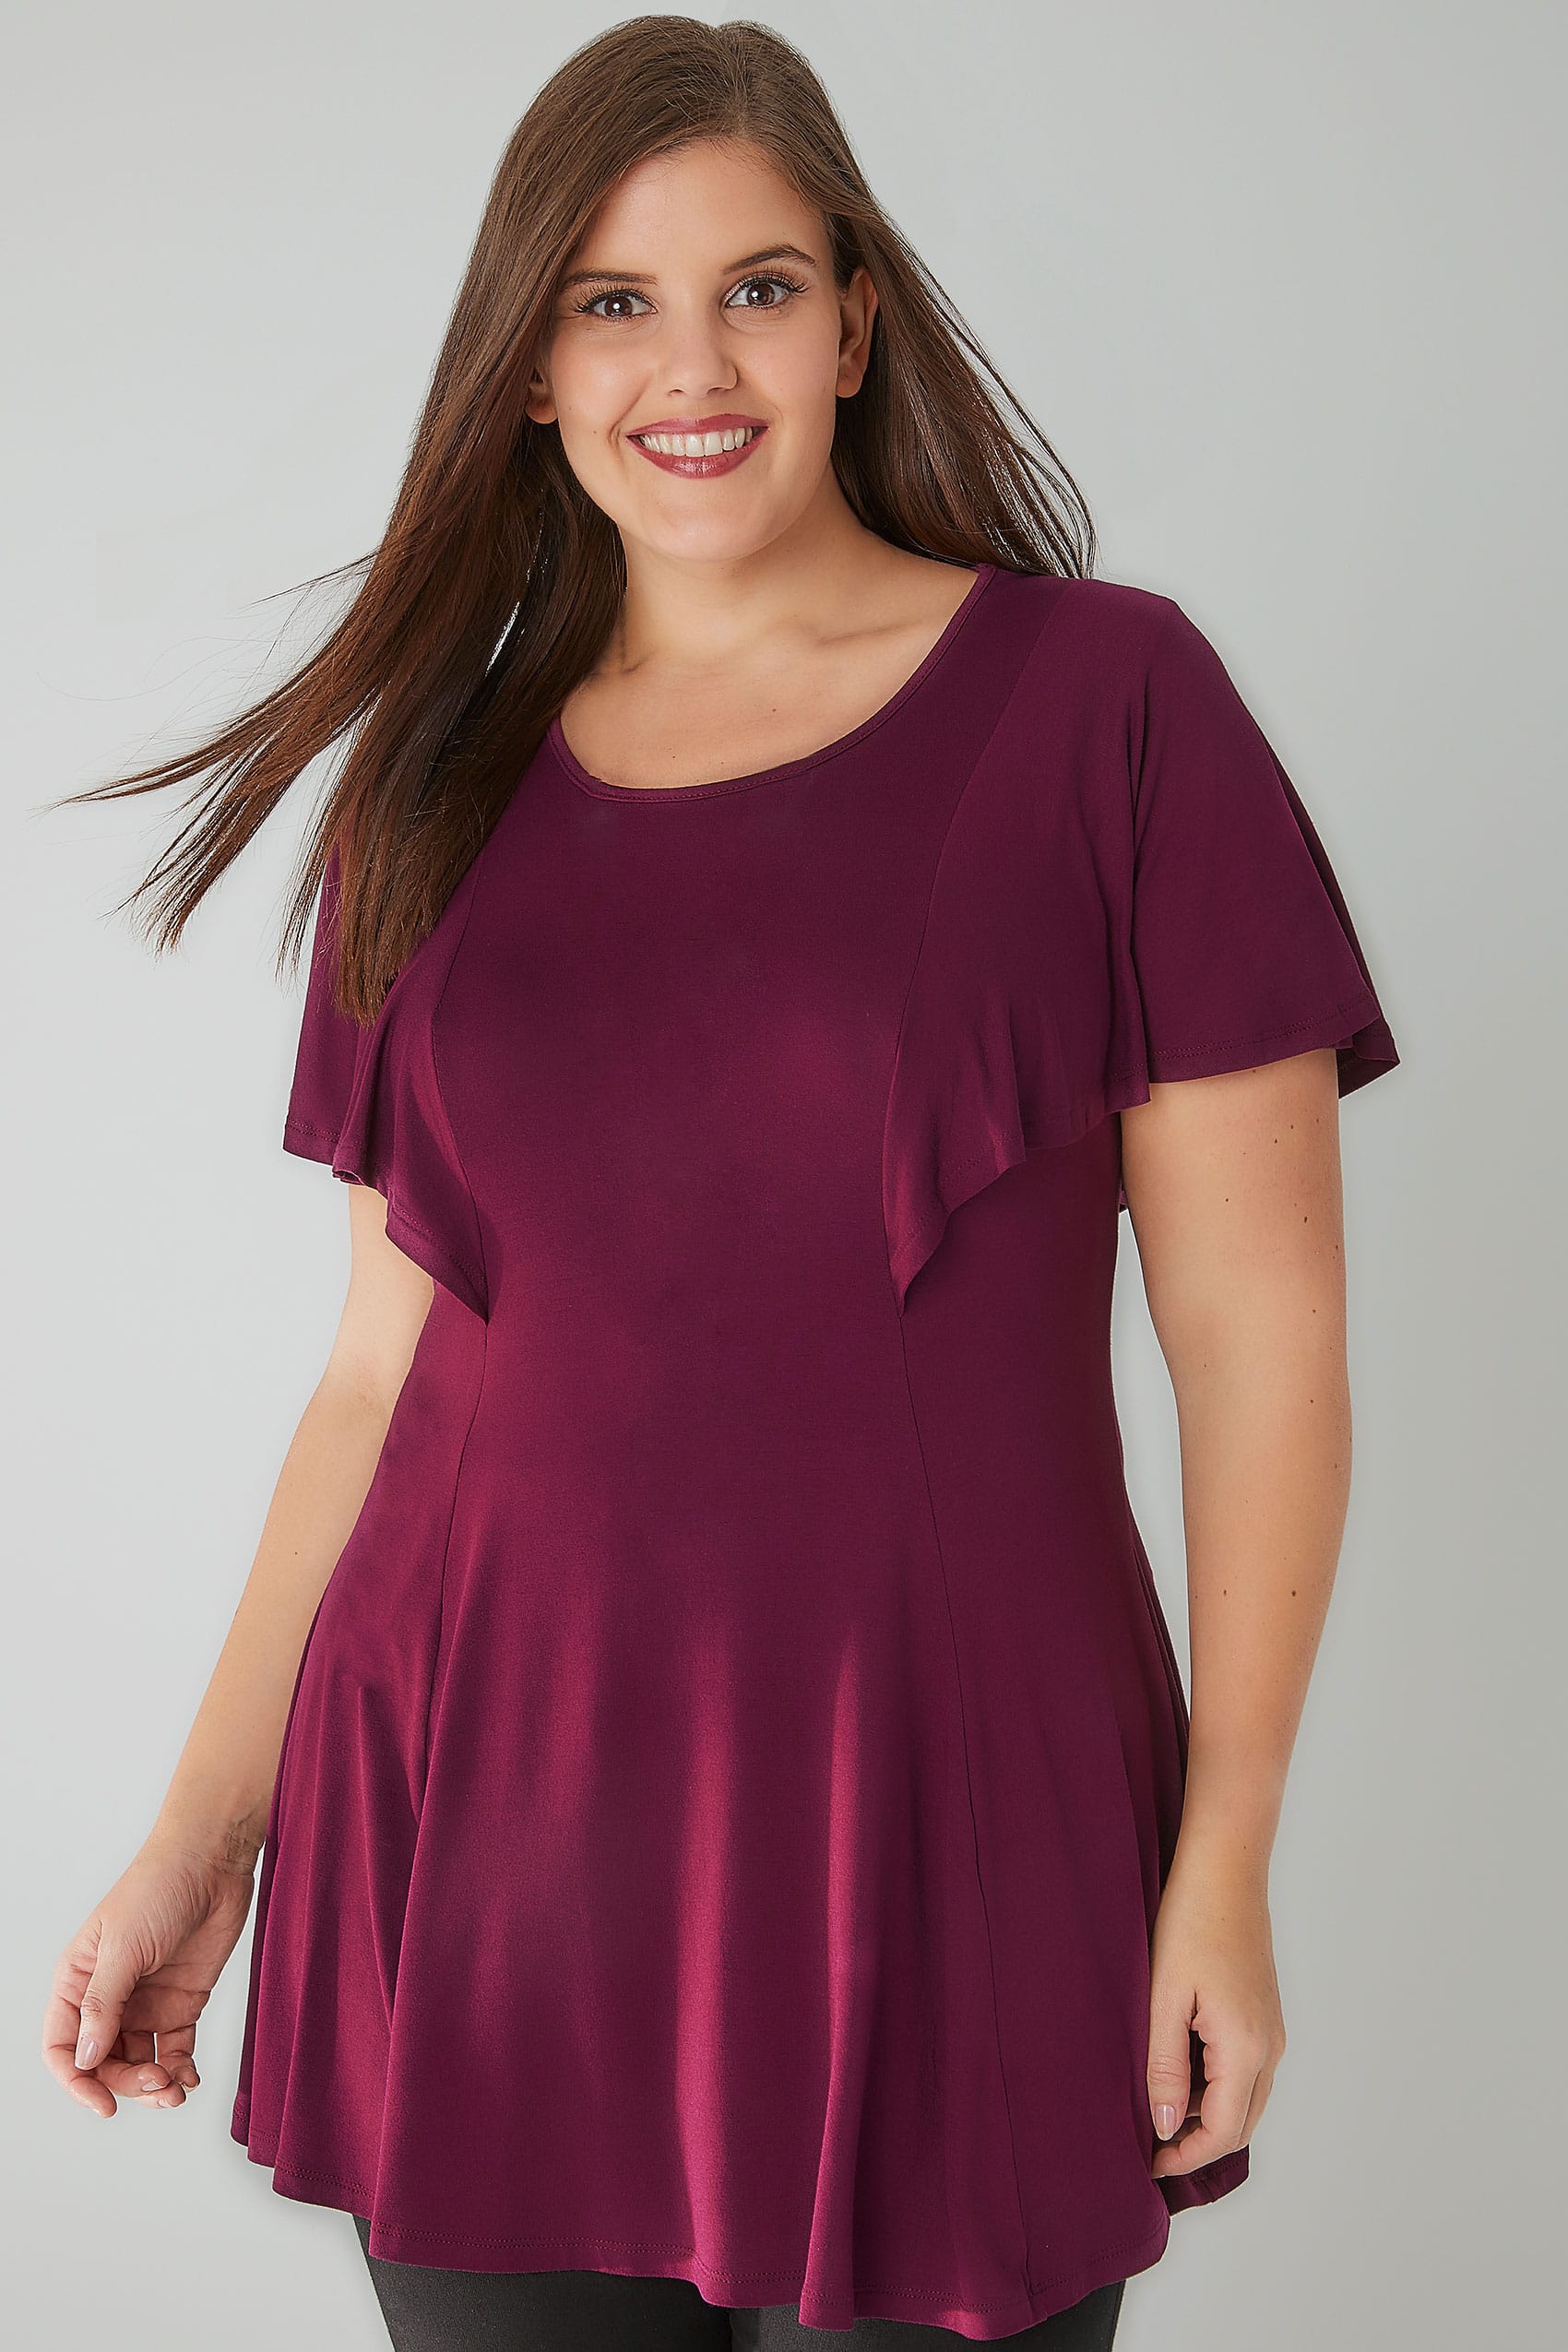 Burgundy Peplum Top With Frill Angel Sleeves , Plus size 16 to 36